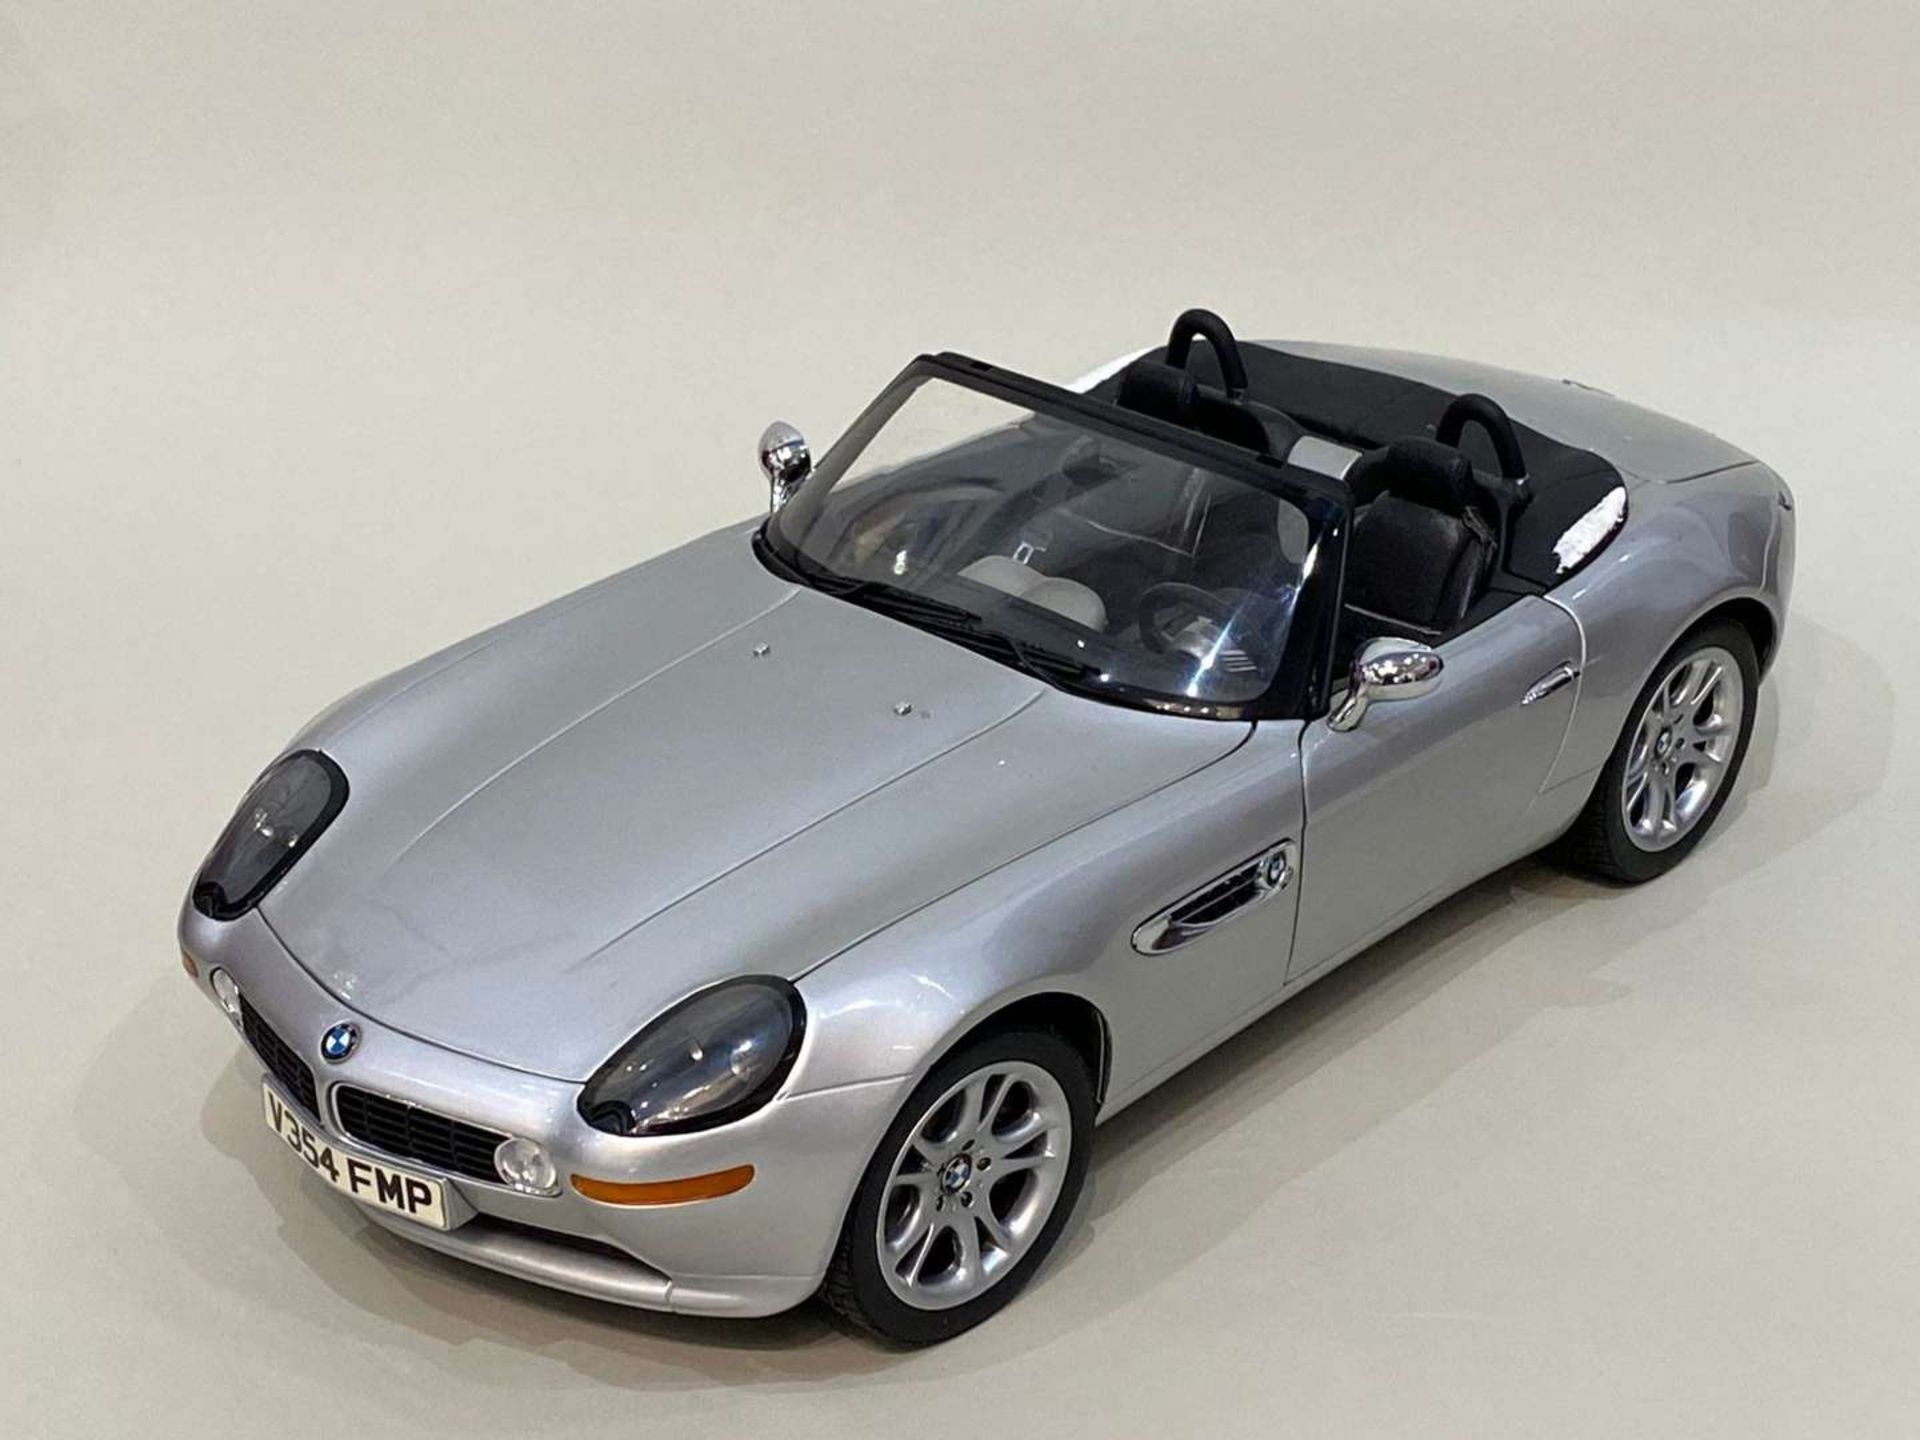 KYOSHO, BMW Z8, James Bond, 007, "The World is Not Enough" 1:12 - Image 2 of 7